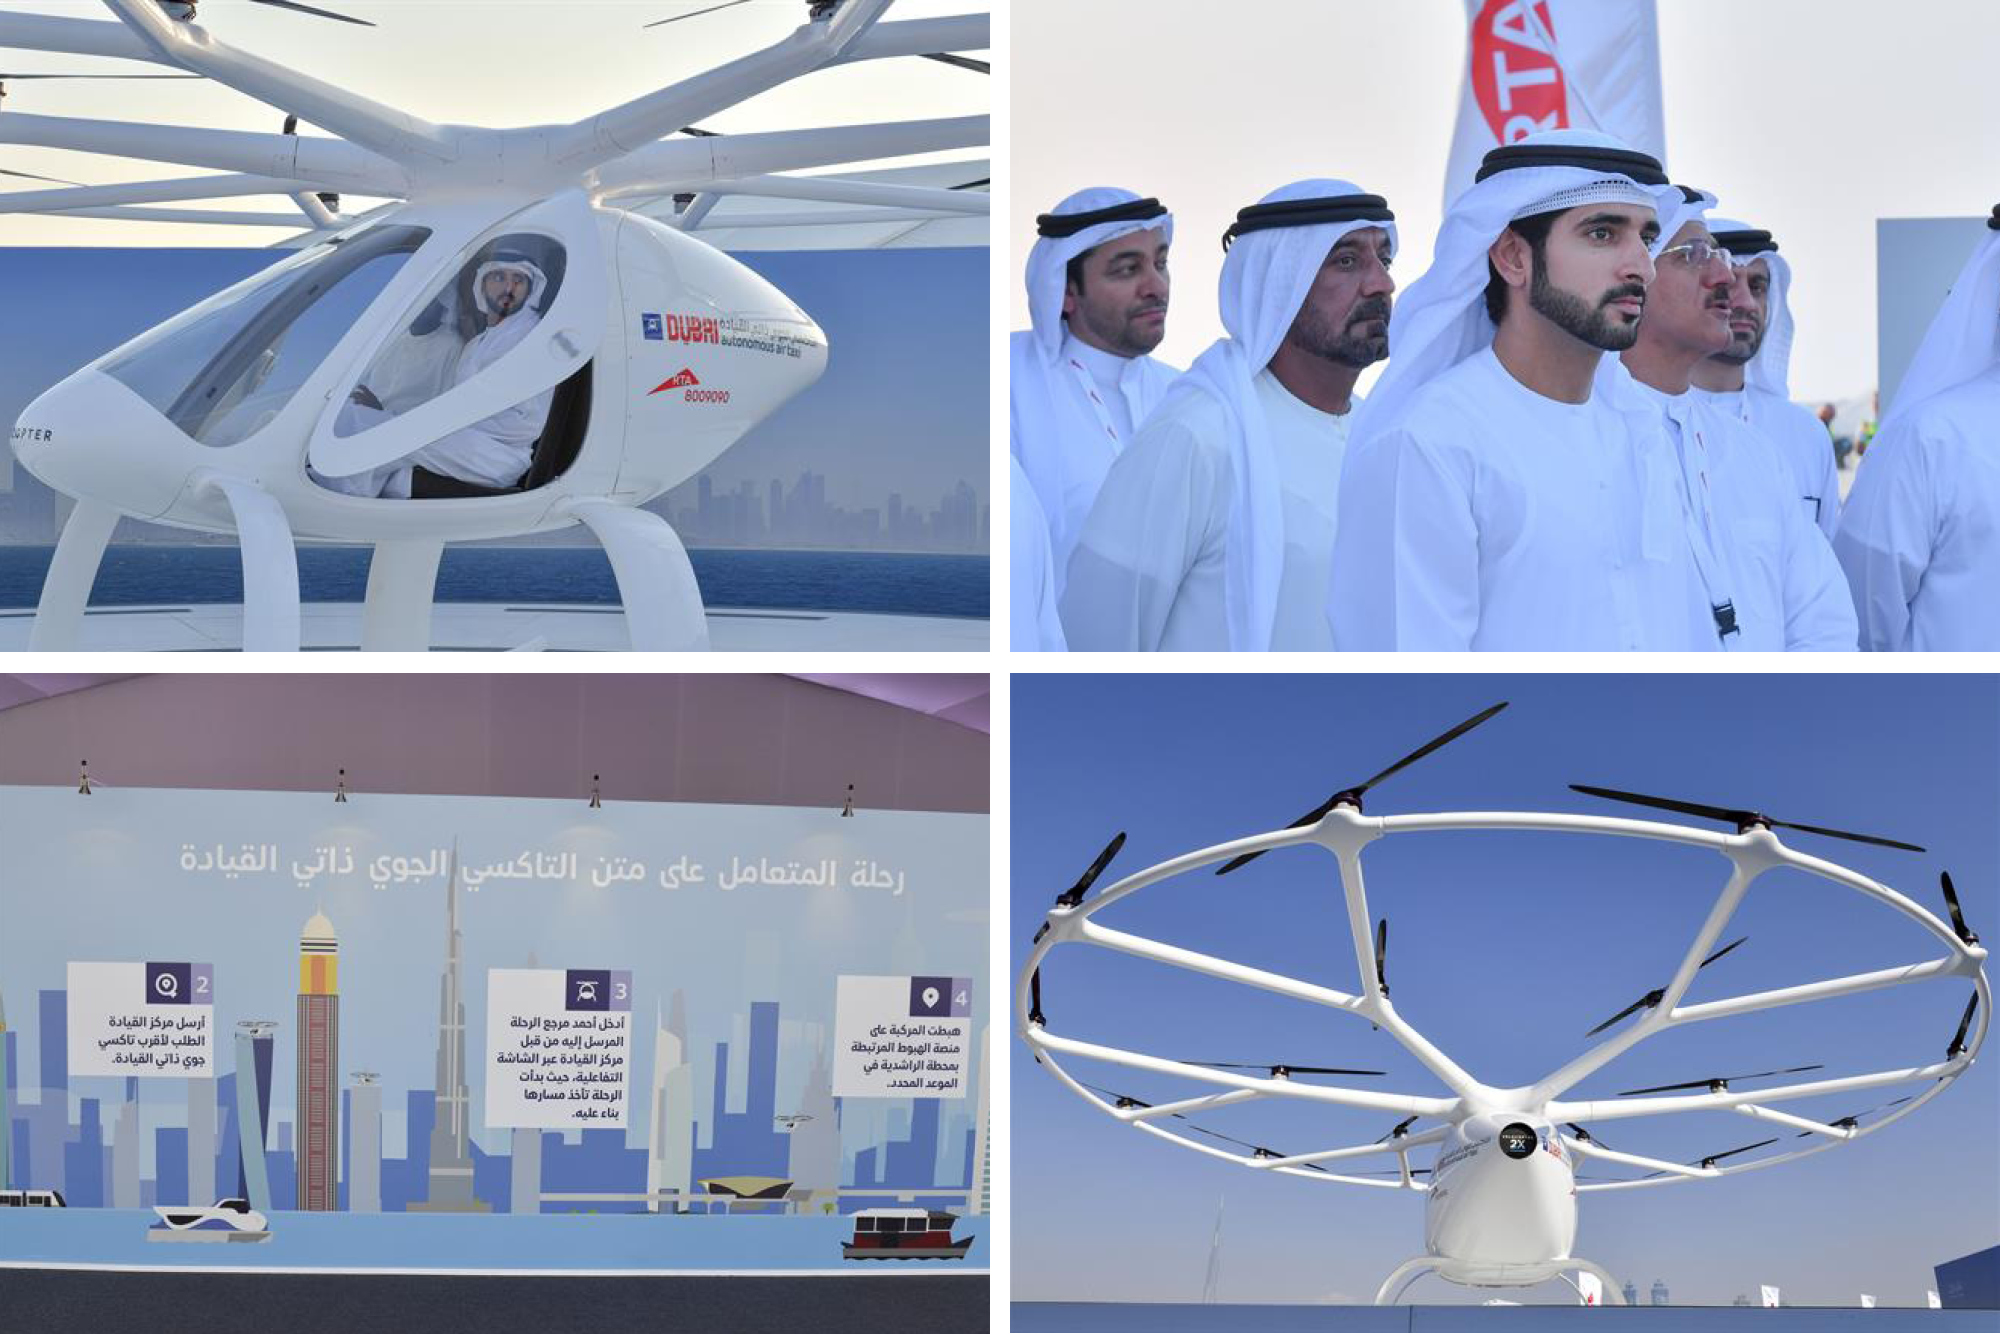 Dubai First Test of Drone | BloombergNEF